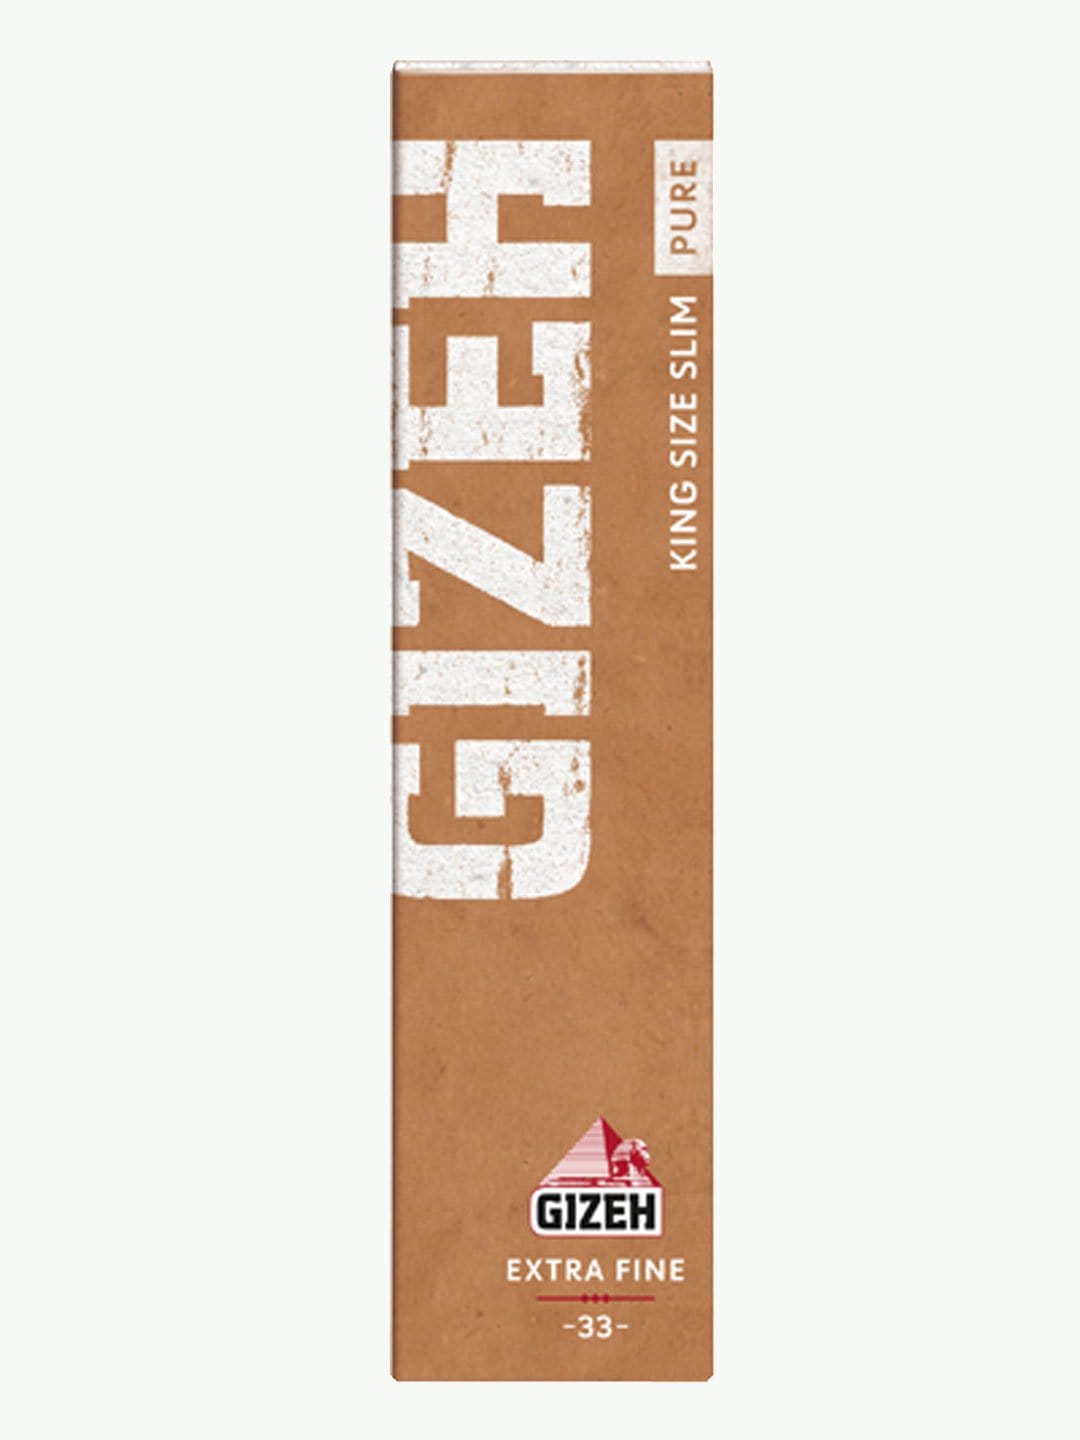 GIZEH Pure Extra Fine Rolling Papers UK | Made From Hemp